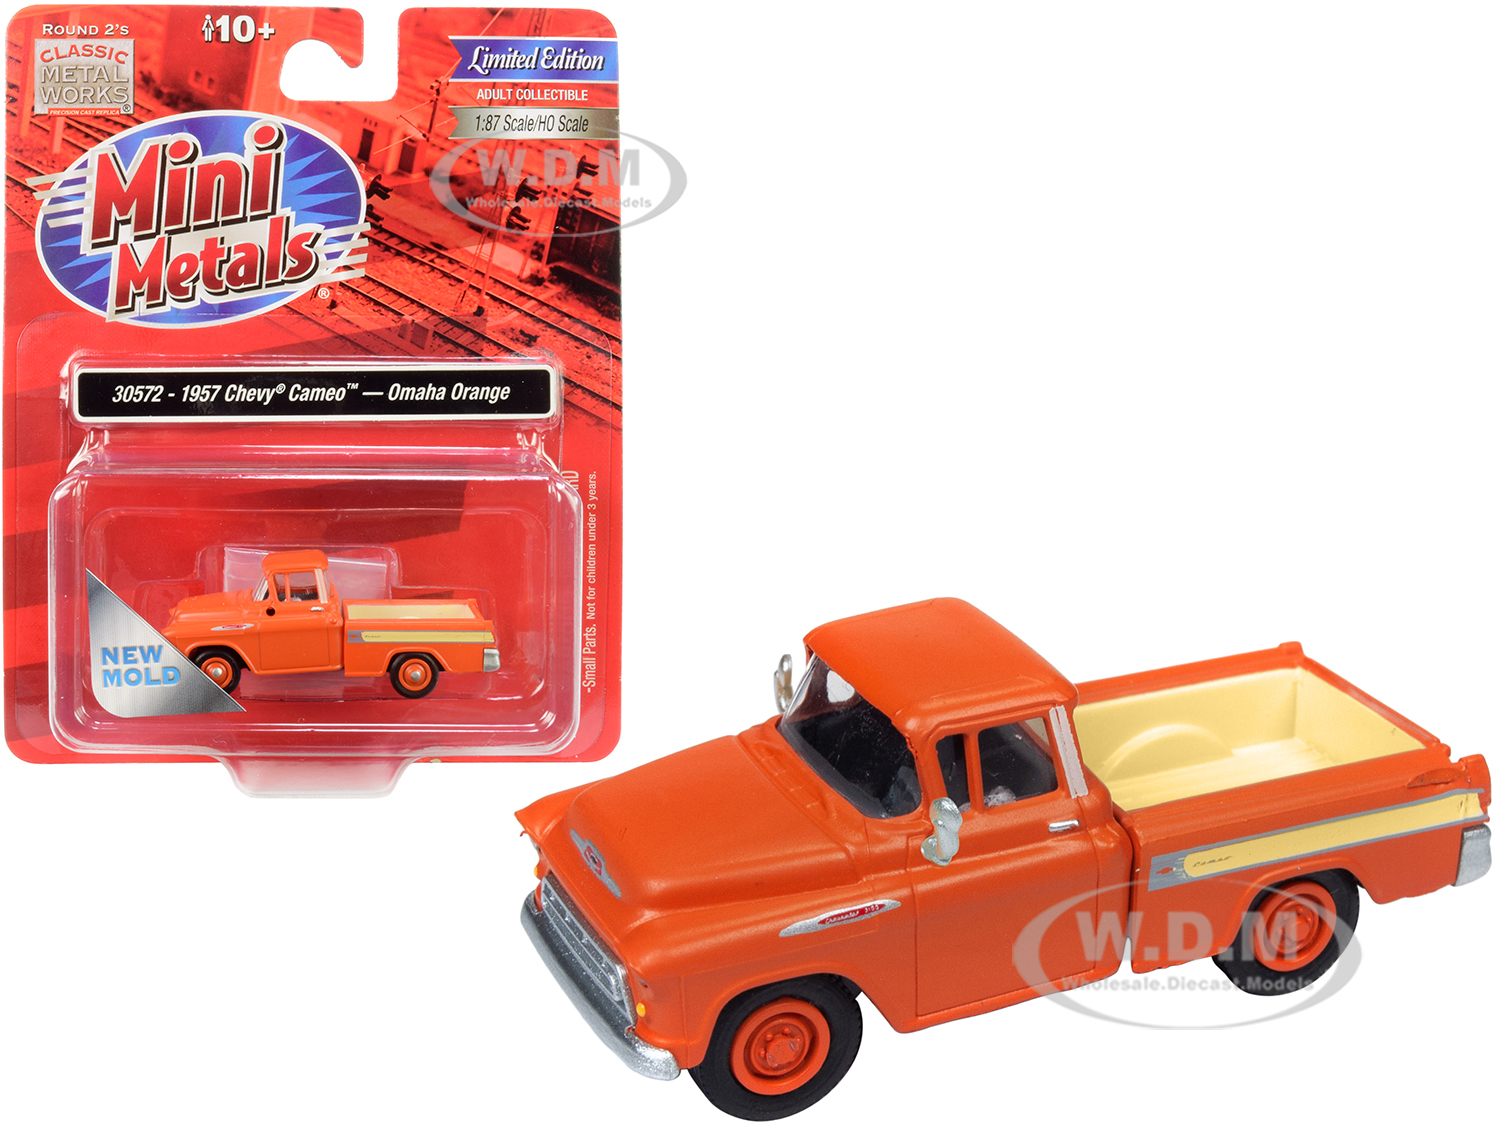 1957 Chevrolet Cameo Pickup Truck Omaha Orange 1/87 (ho) Scale Model Car By Classic Metal Works